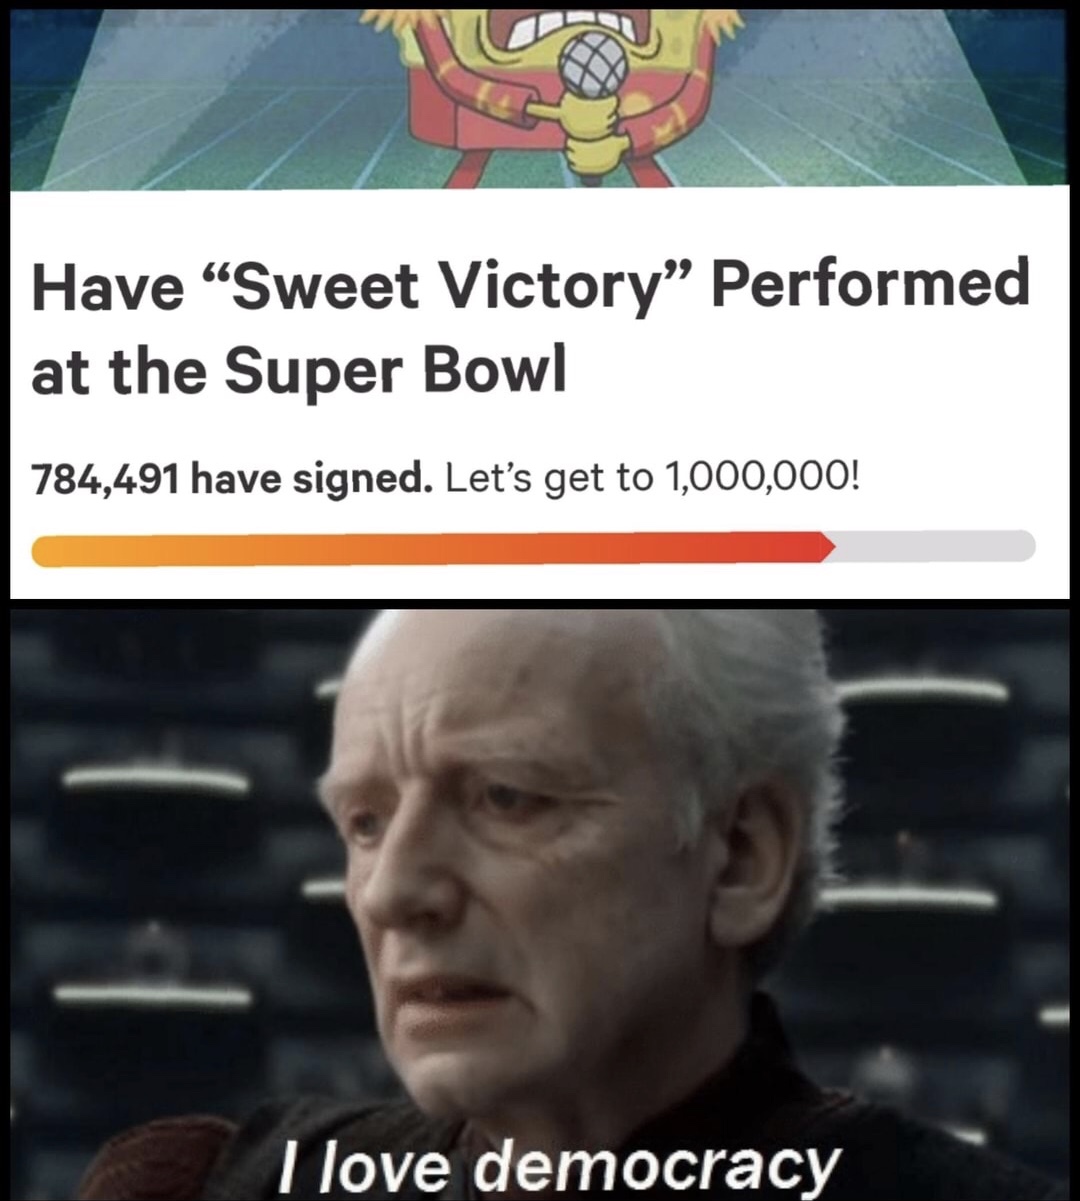 dank meme about love democracy meme - Have Sweet Victory Performed at the Super Bowl 784,491 have signed. Let's get to 1,000,000! I love democracy